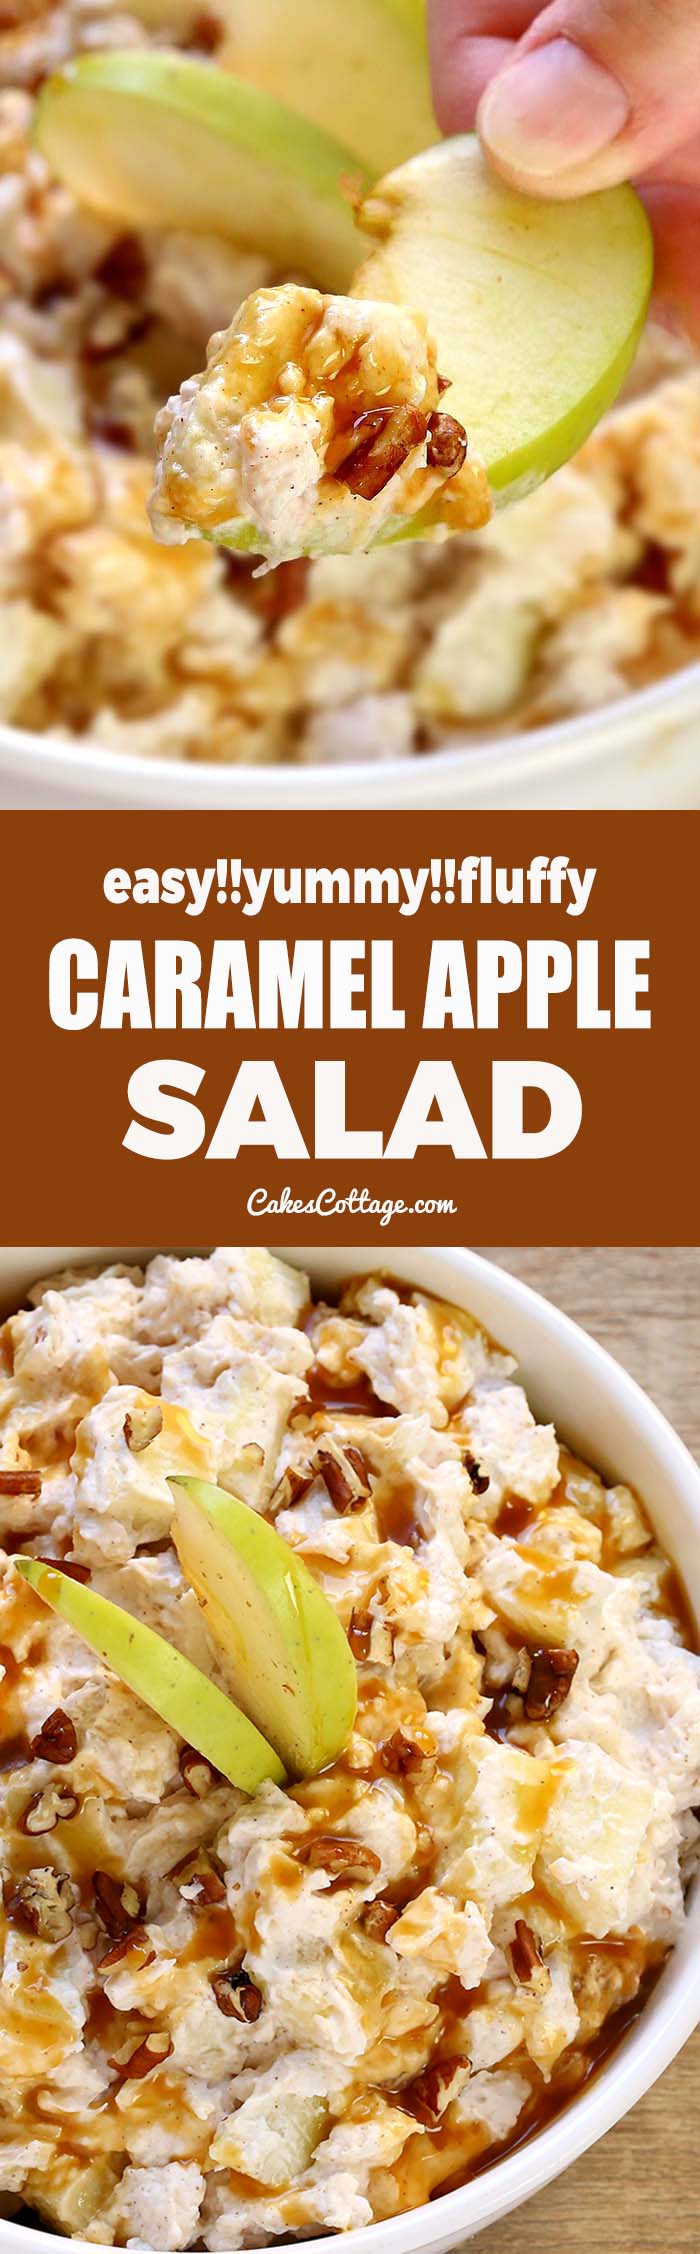 Caramel Apple Salad is a super simple, delicious fall salad! It only take a few ingredients and couple minutes to whip up, and is always a hit at parties.